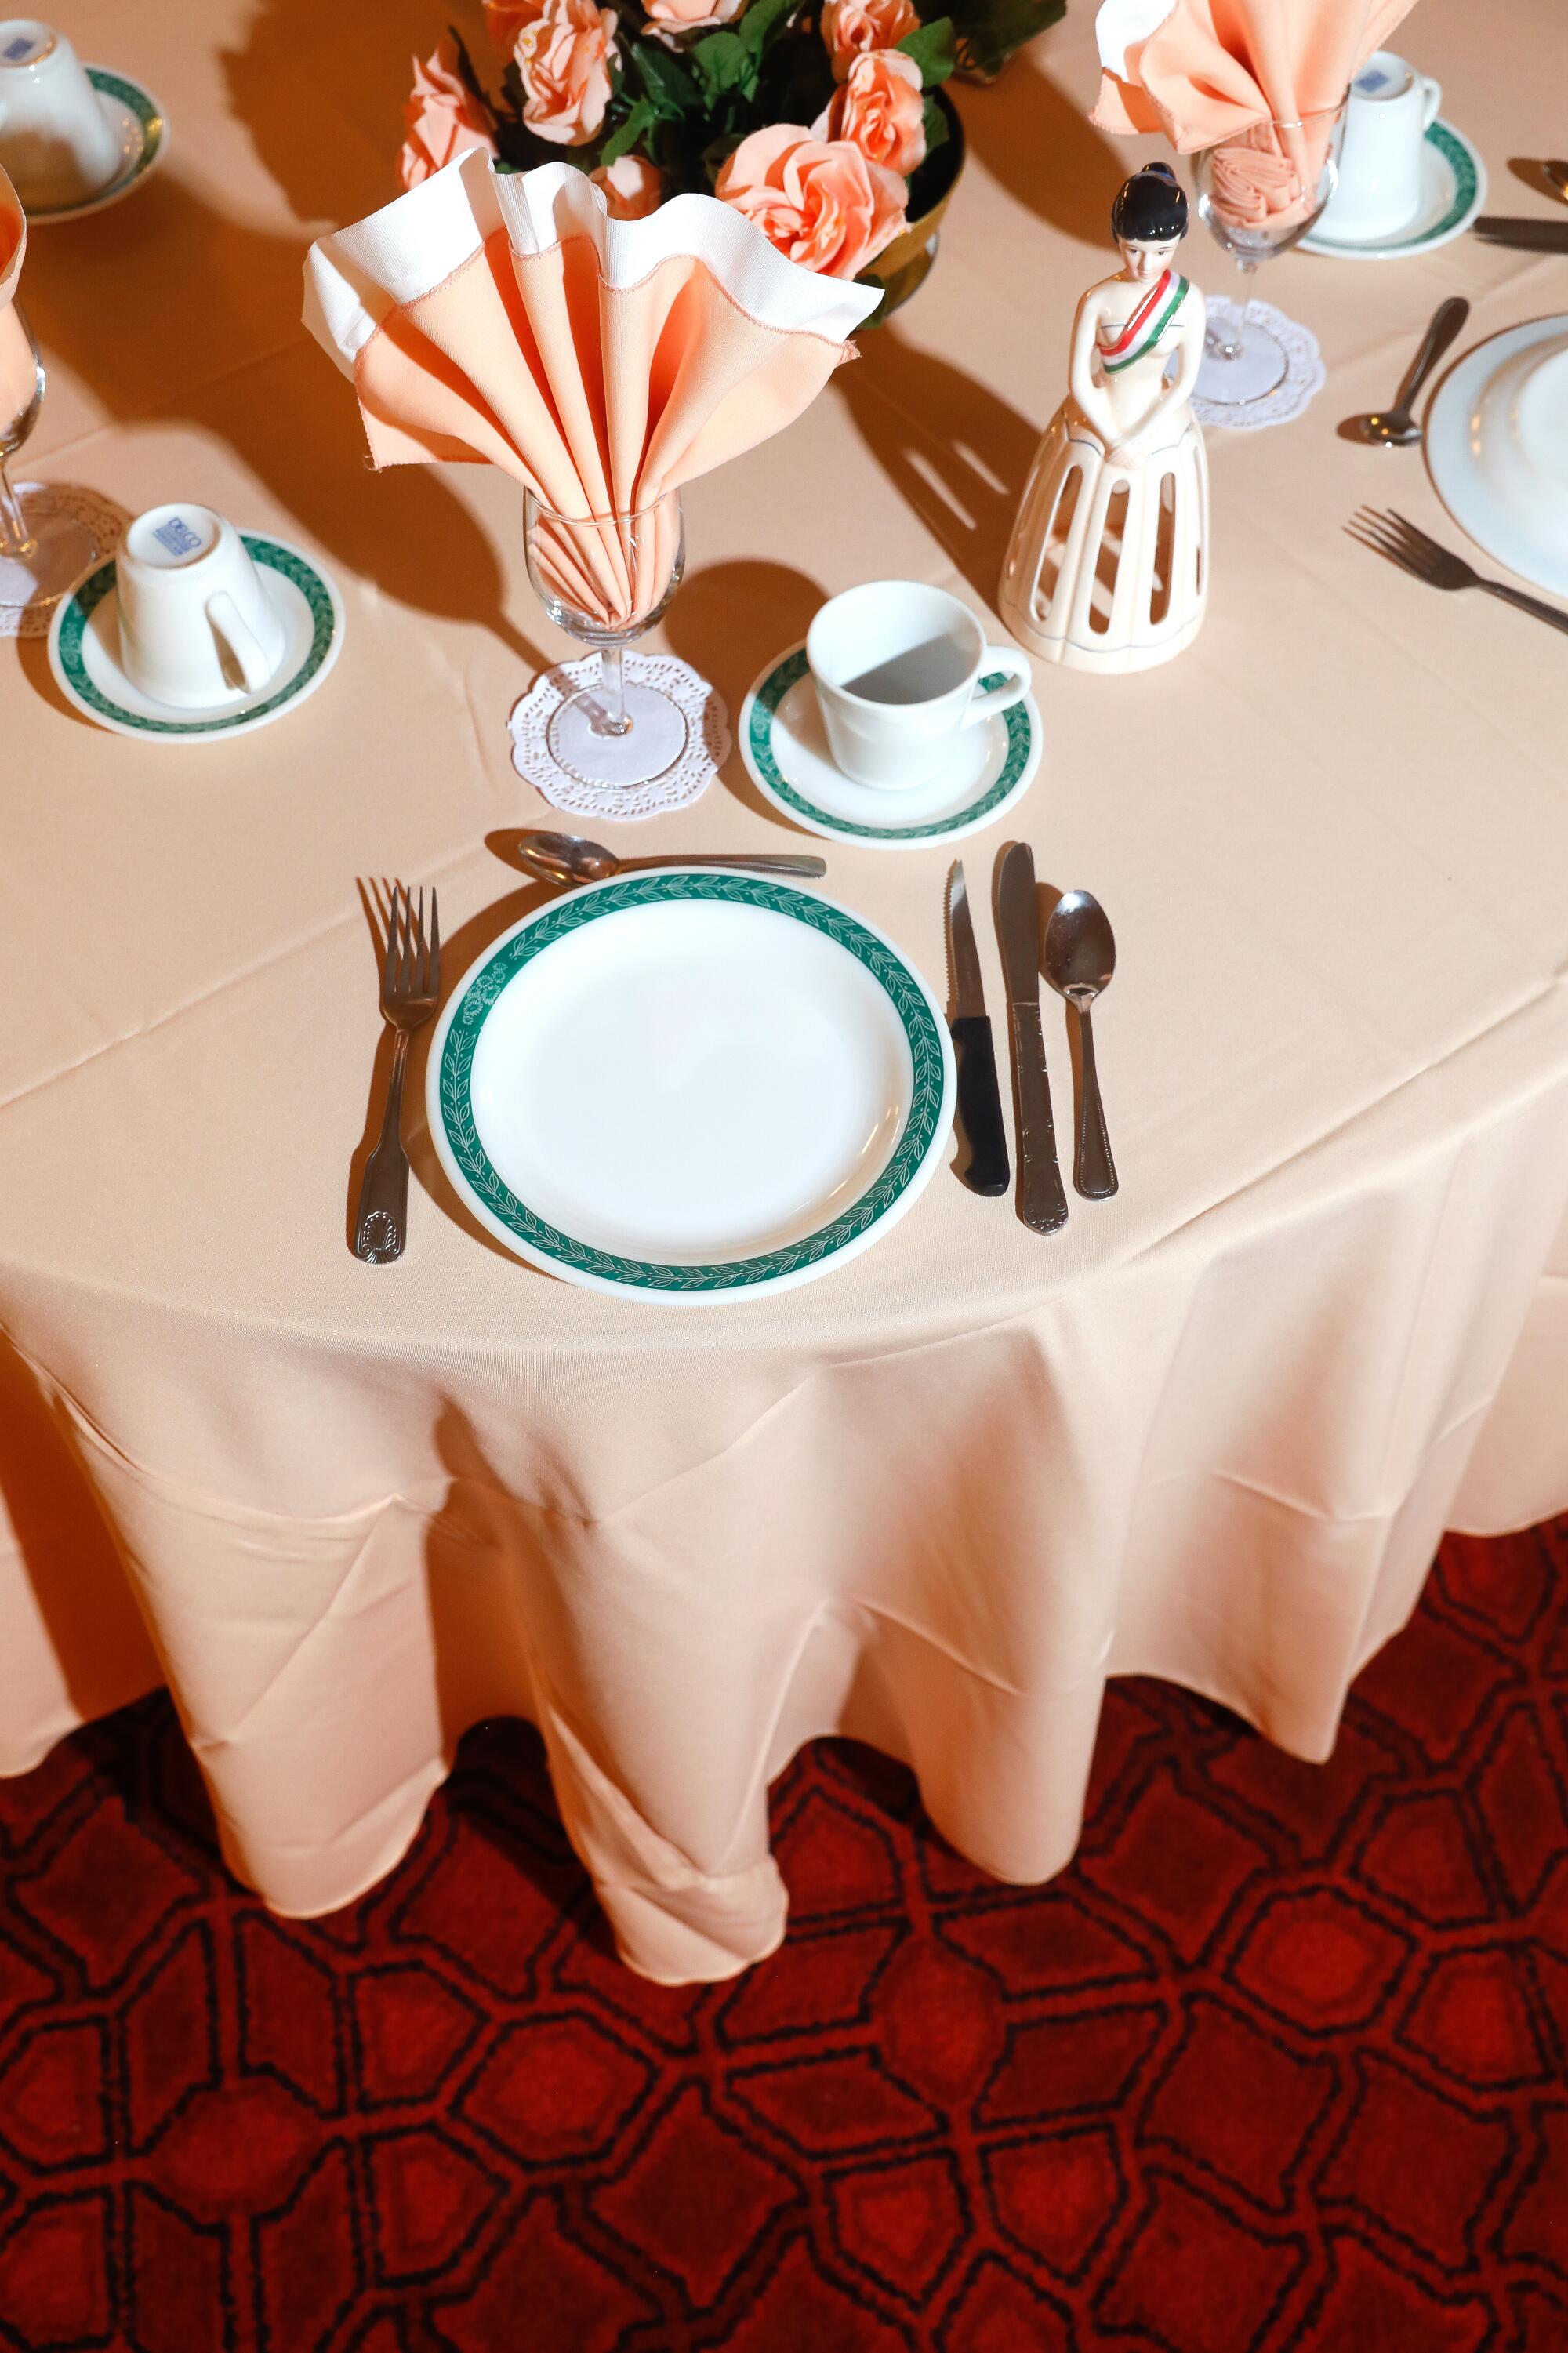 White plates with a green rim, cutlery, a pink tablecloth and pink napkins decorate a table.